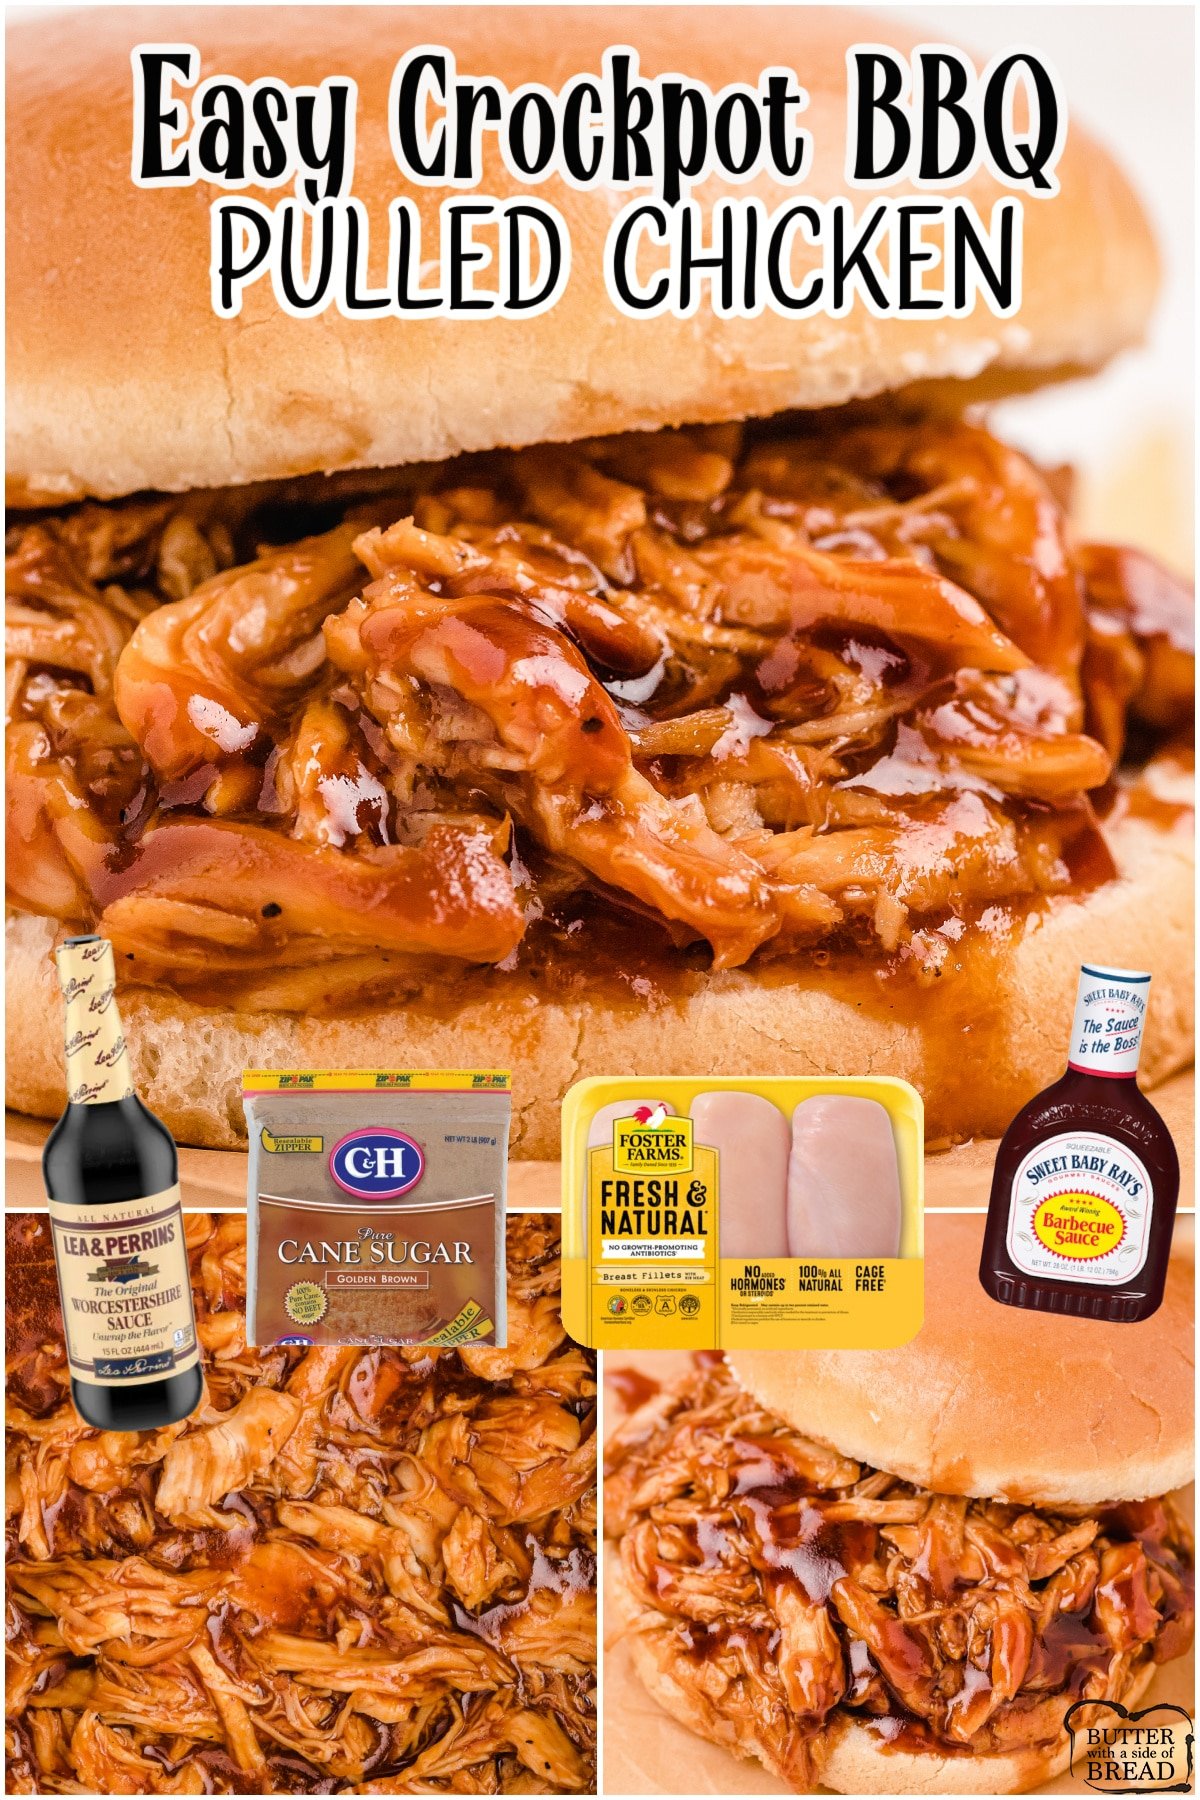 Crockpot Pulled BBQ Chicken Sandwiches are an easy slow cooker made with just 5 ingredients! Tender, flavorful shredded chicken sandwiches are a great weeknight meal everyone loves. 